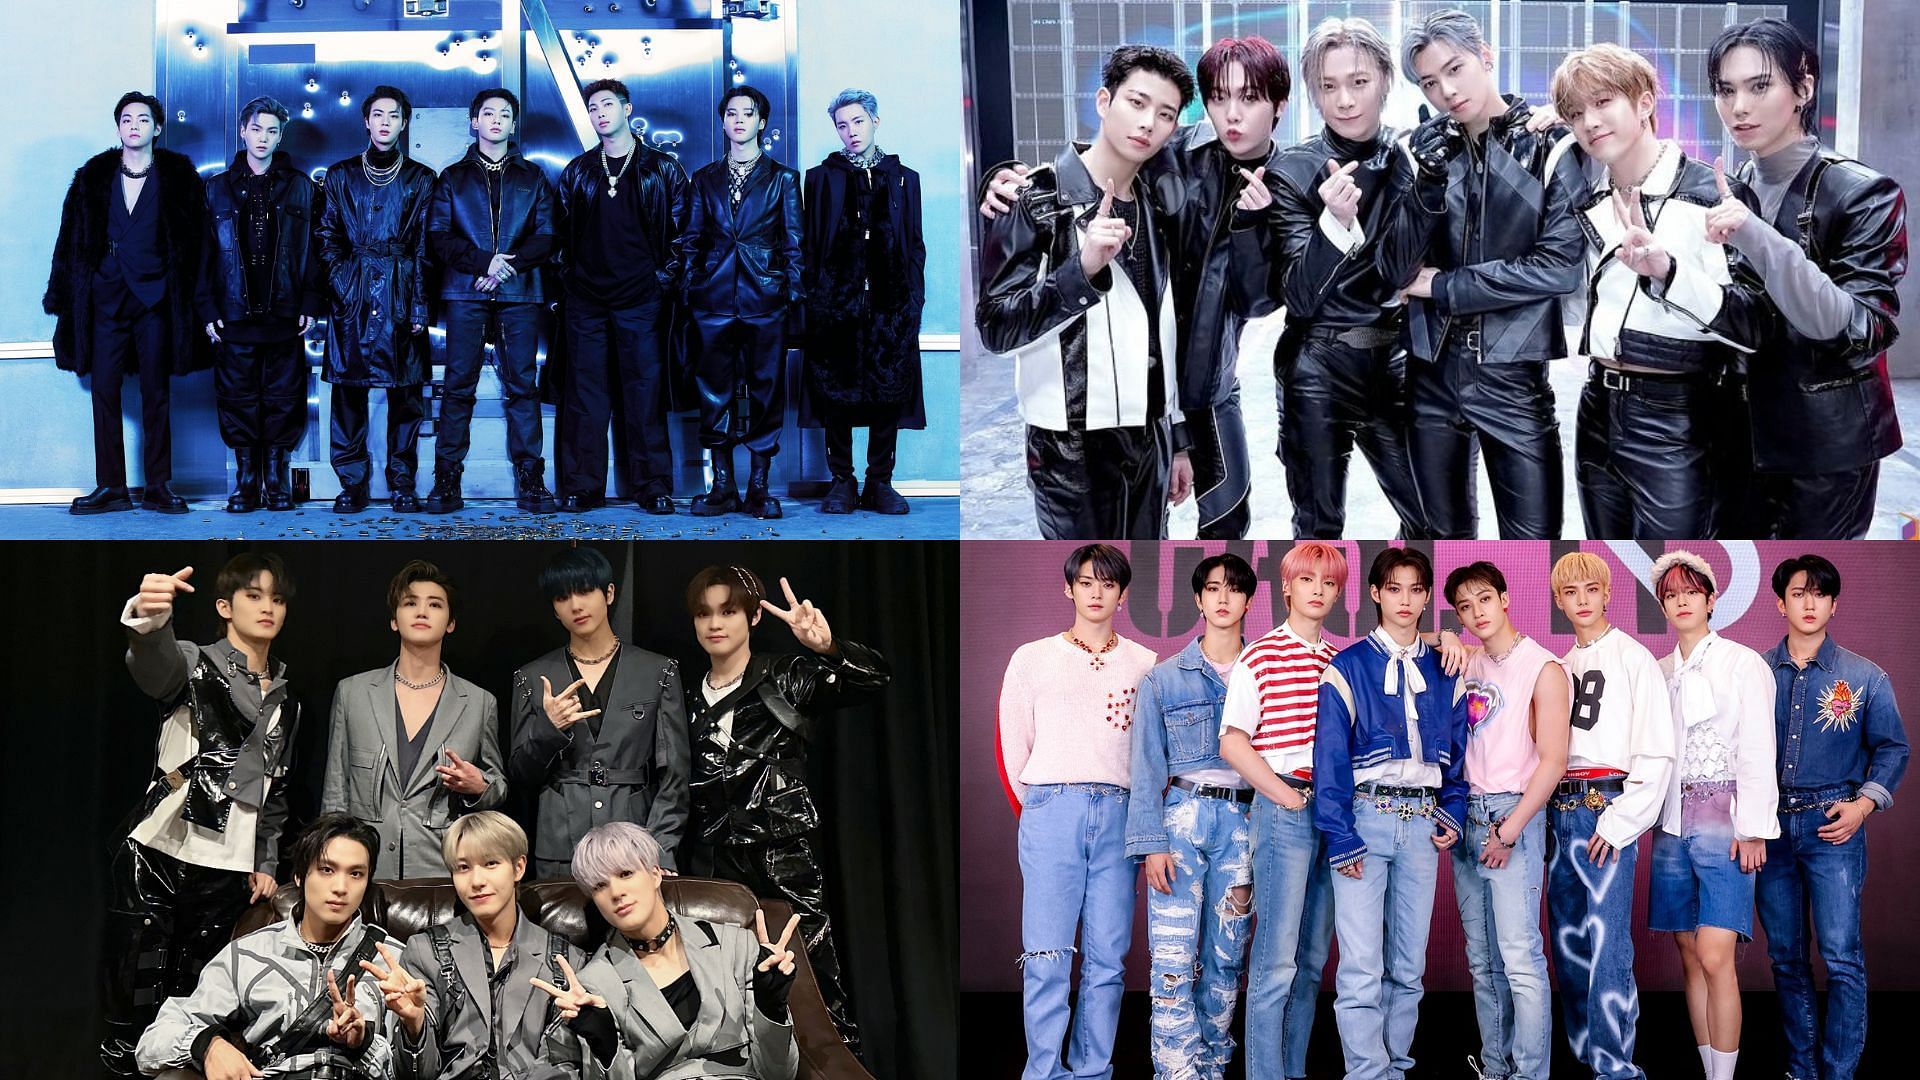 A Brazilian website polled millions of fans to get a list of top 100 best K-pop groups of all time.